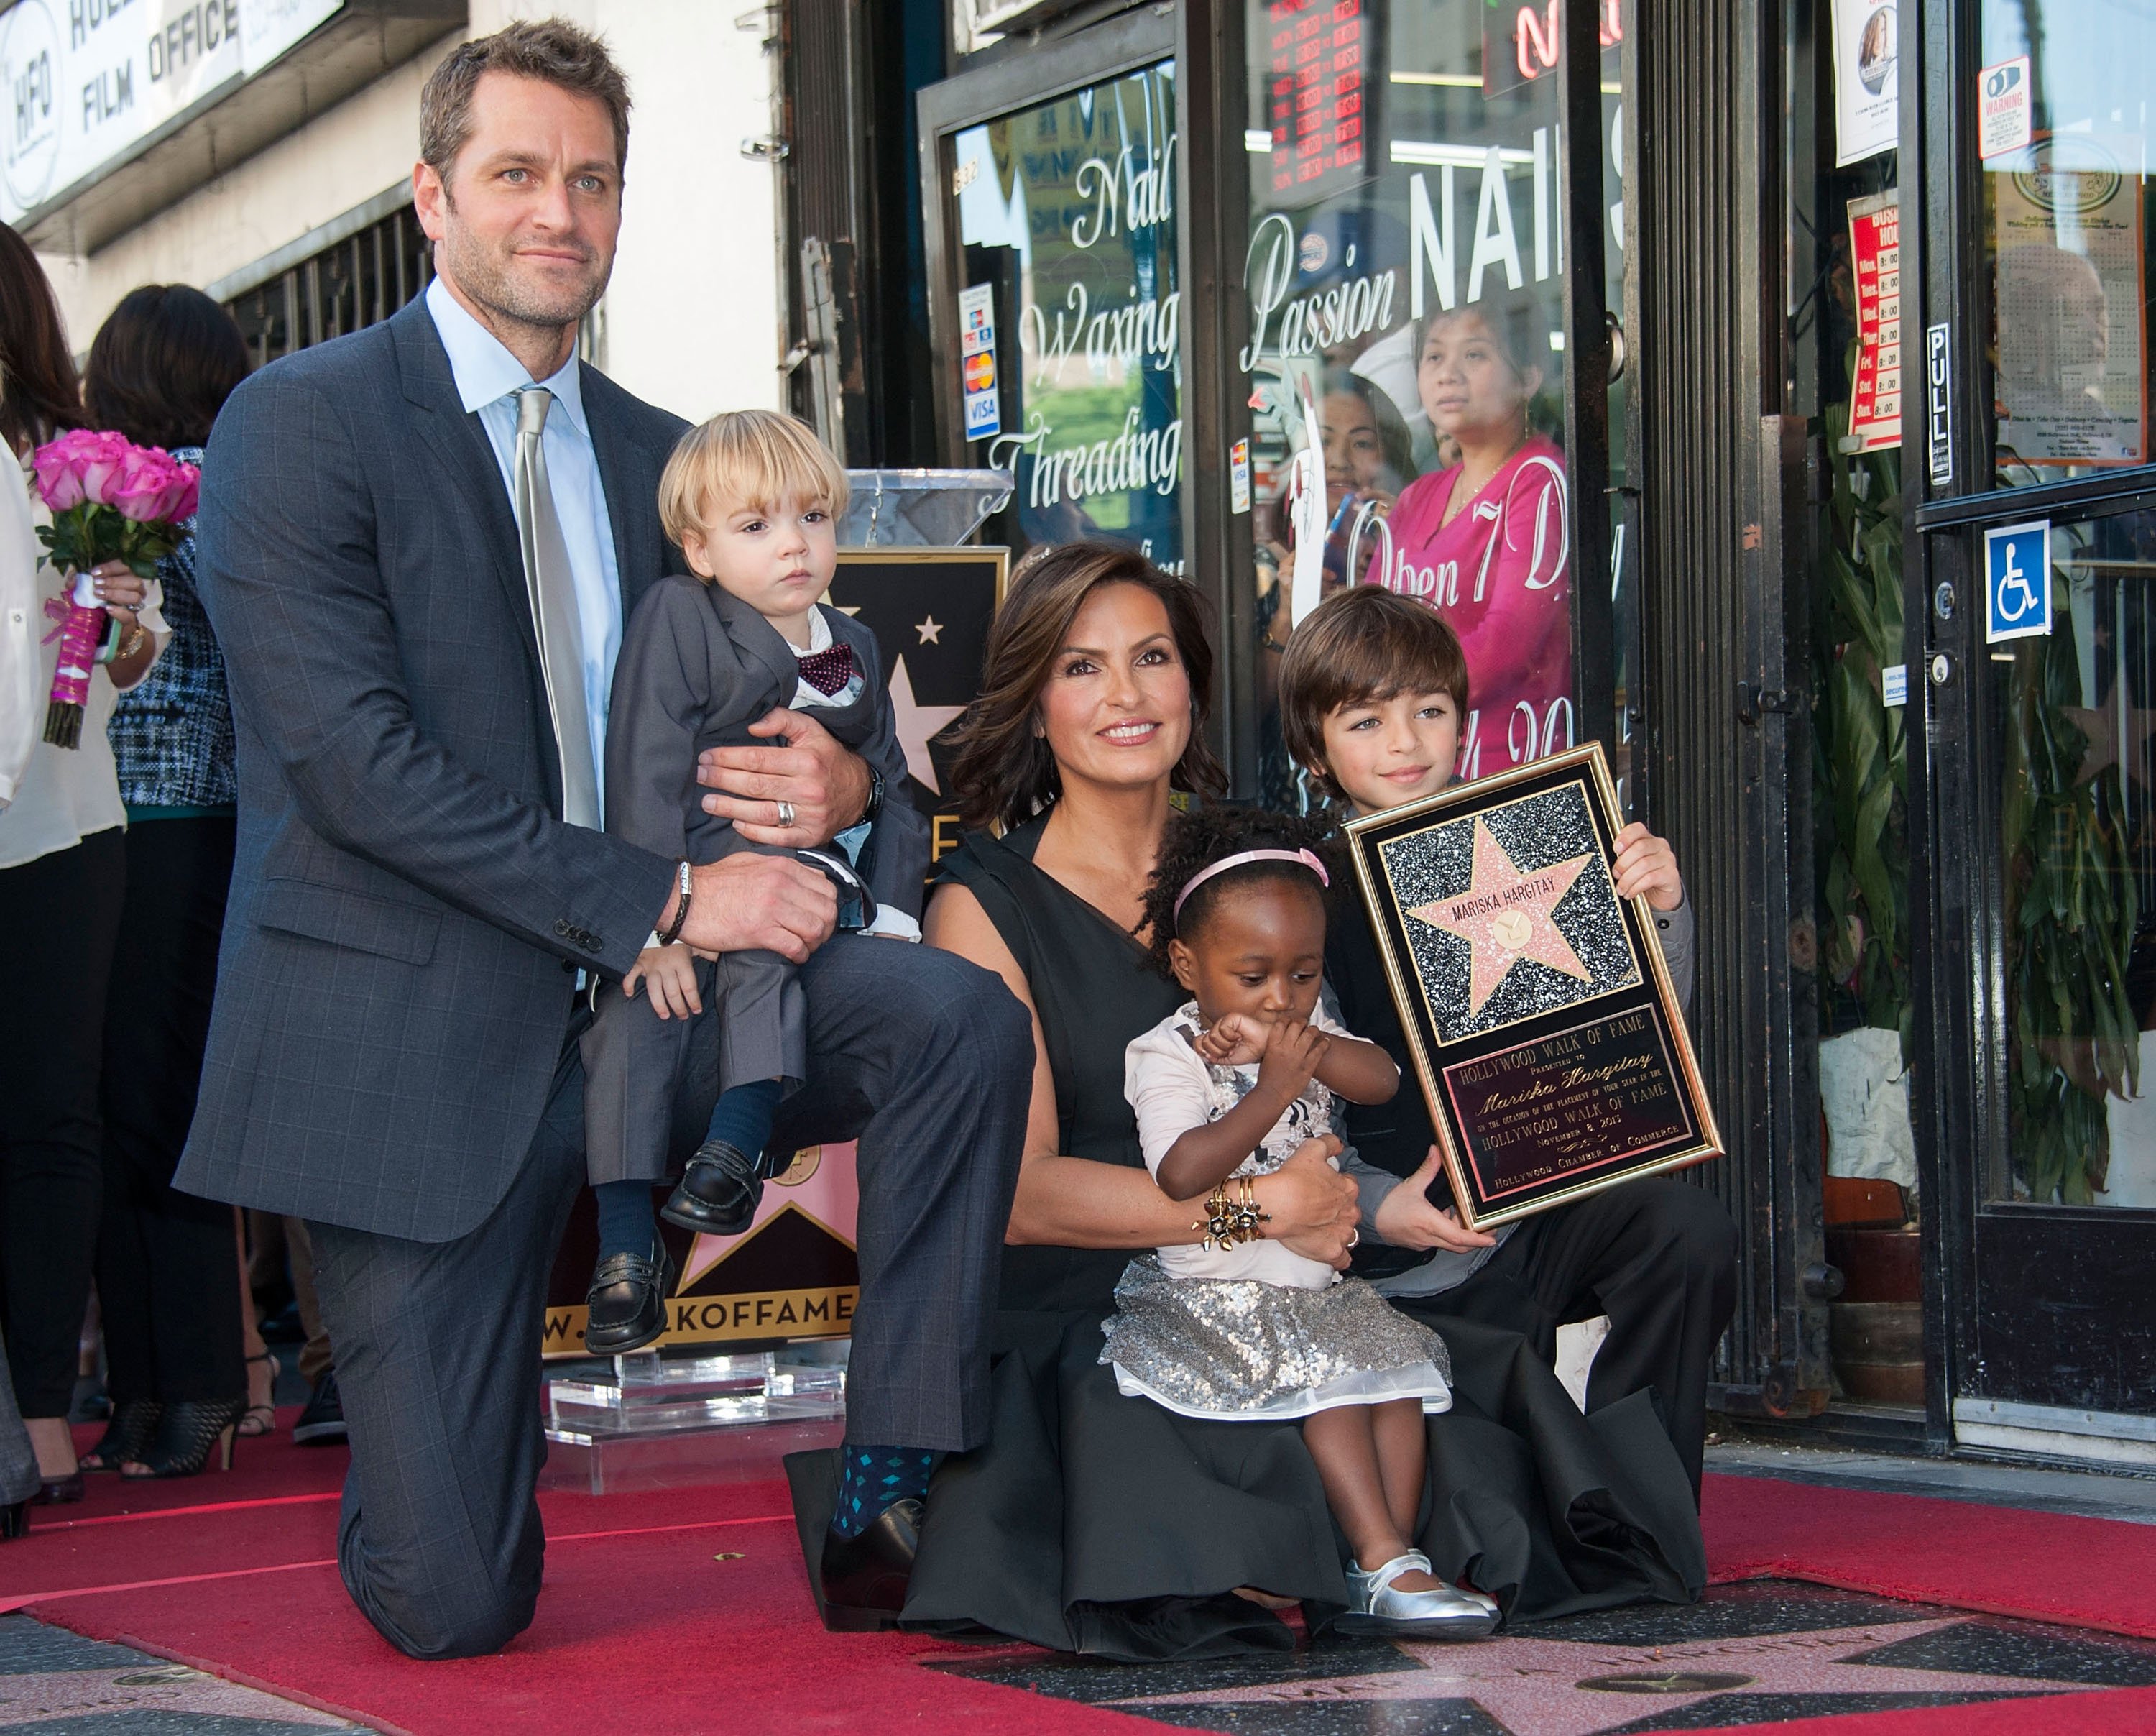 Mariska Hargitay and her family on The Hollywood Walk of Fame on November 8, 2013 in Hollywood, California | Source: Getty Images